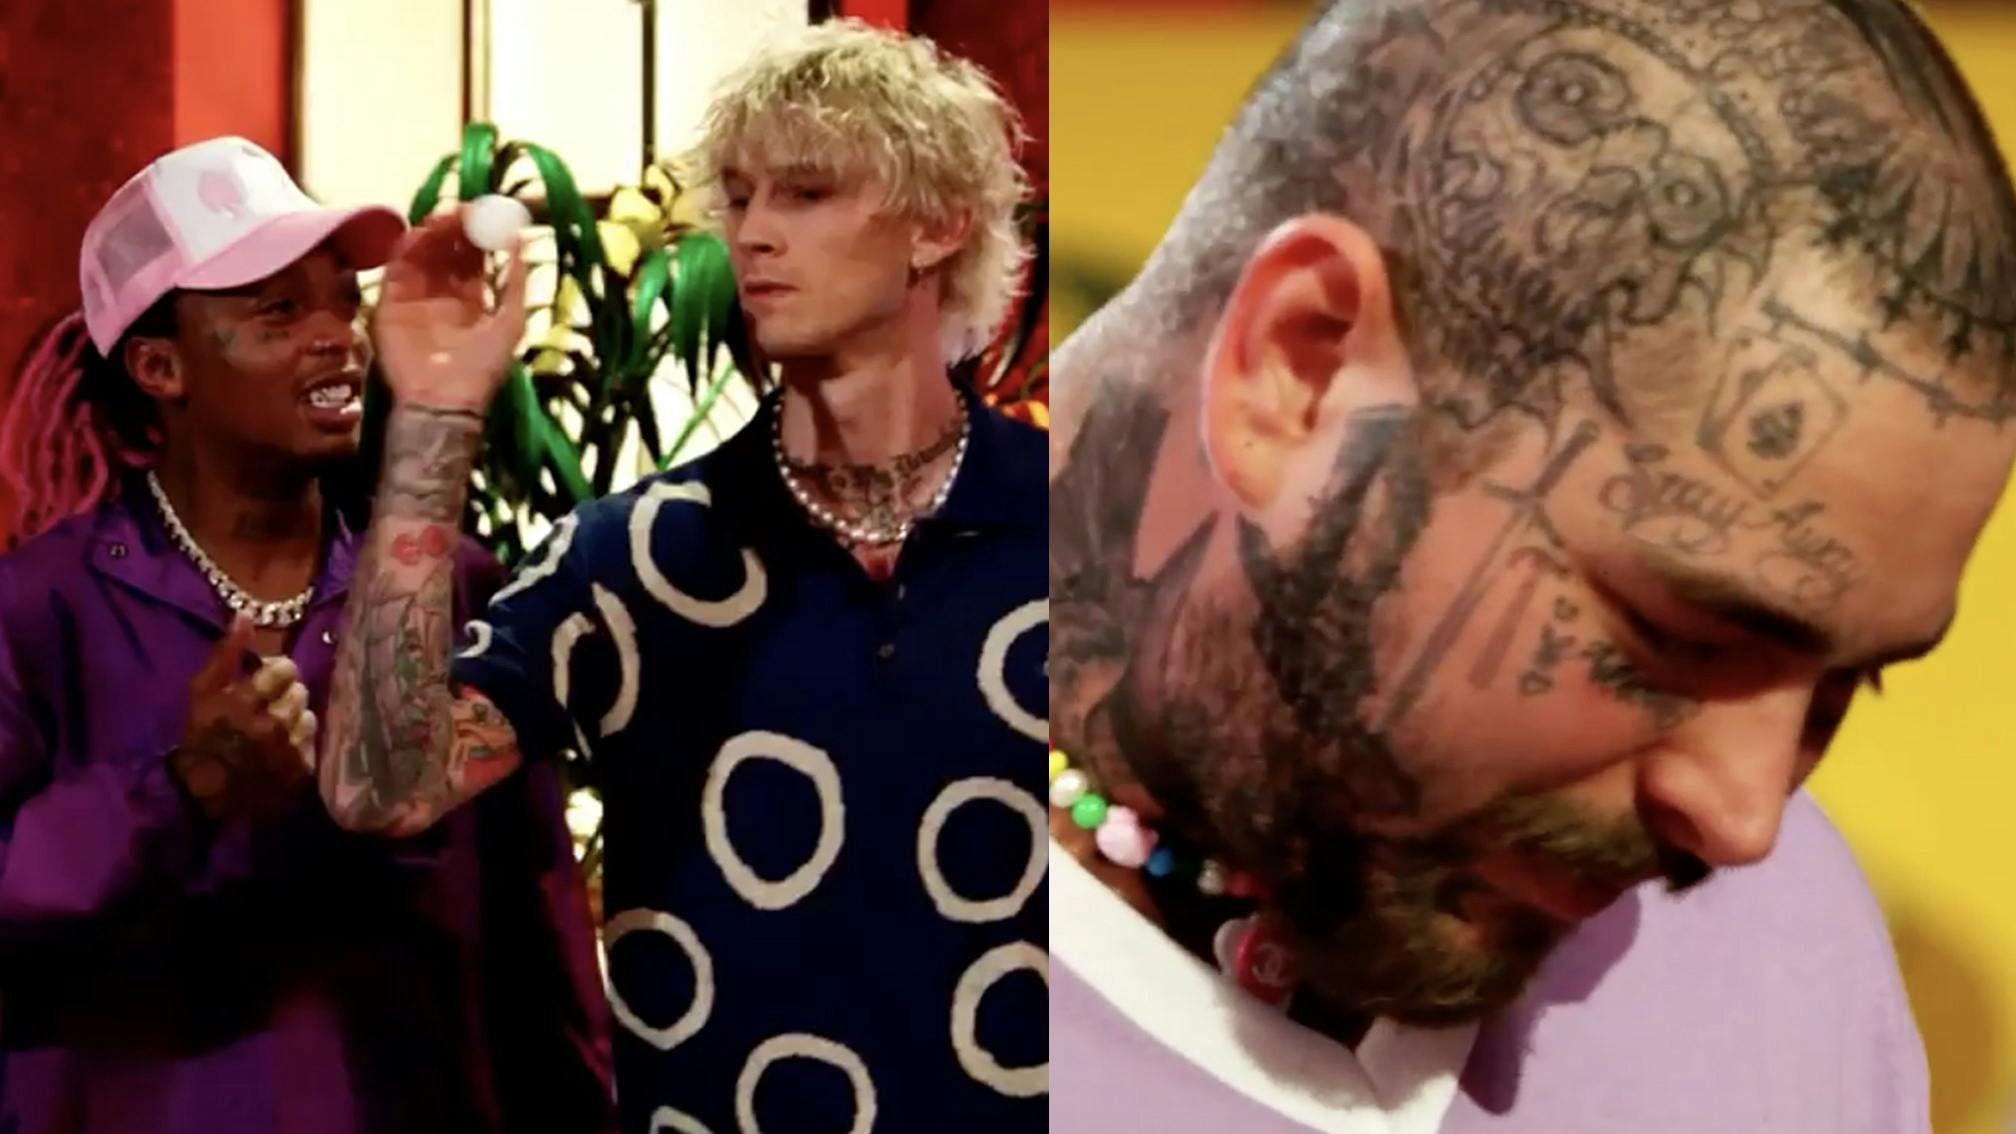 Watch Machine Gun Kelly And Post Malone Go Head-To-Head In A Tense Game Of Beer Pong